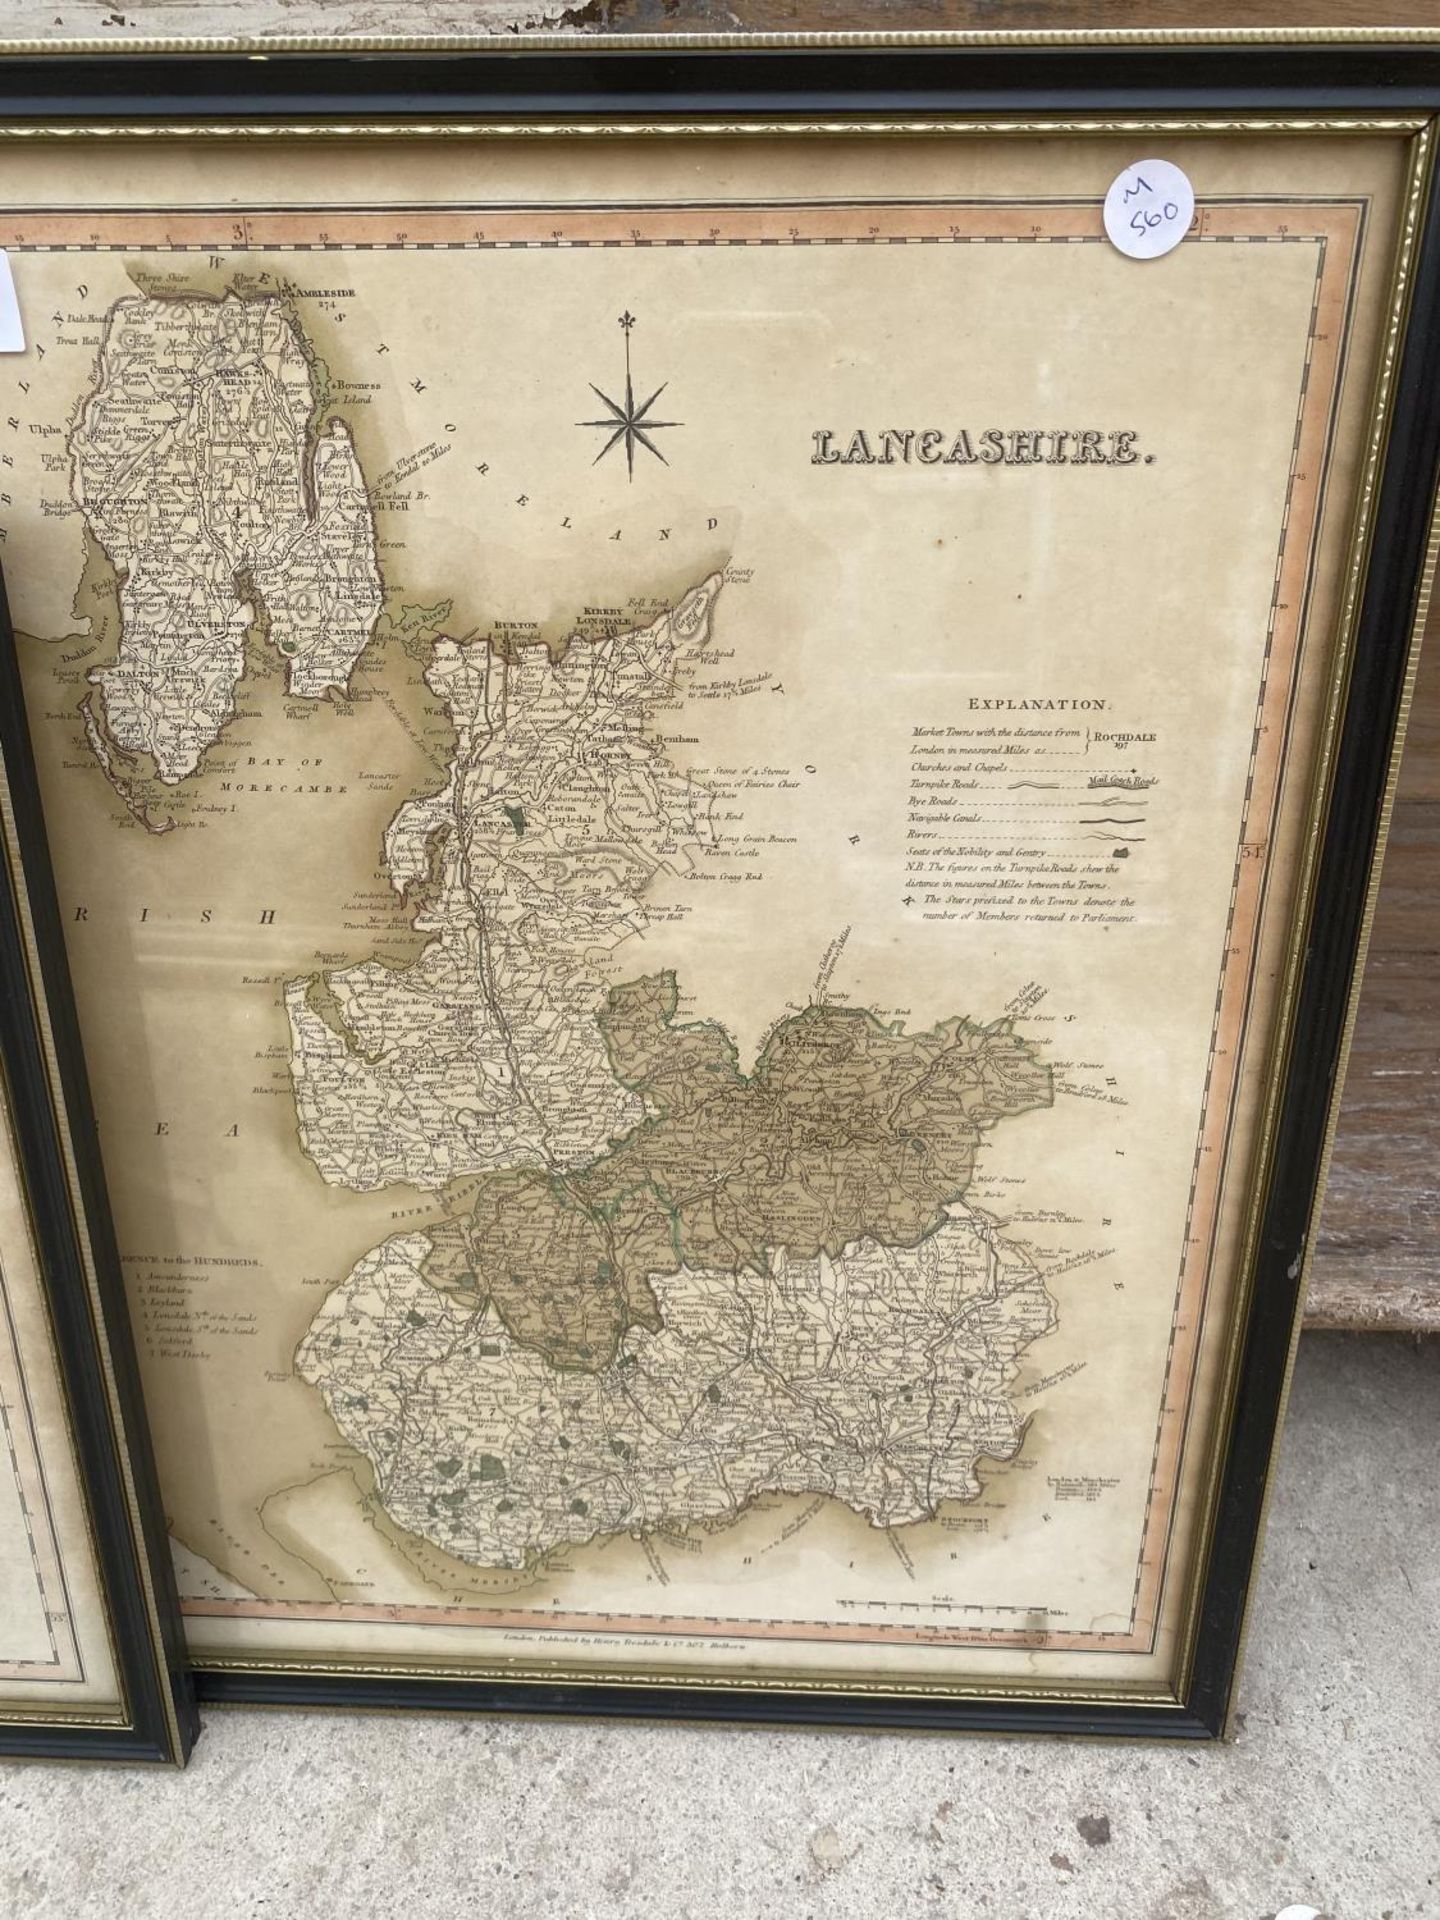 TWO FRAMED MAPS, ONE OF LANCASHIRE AND ONE OF CHESHIRE - Image 2 of 3